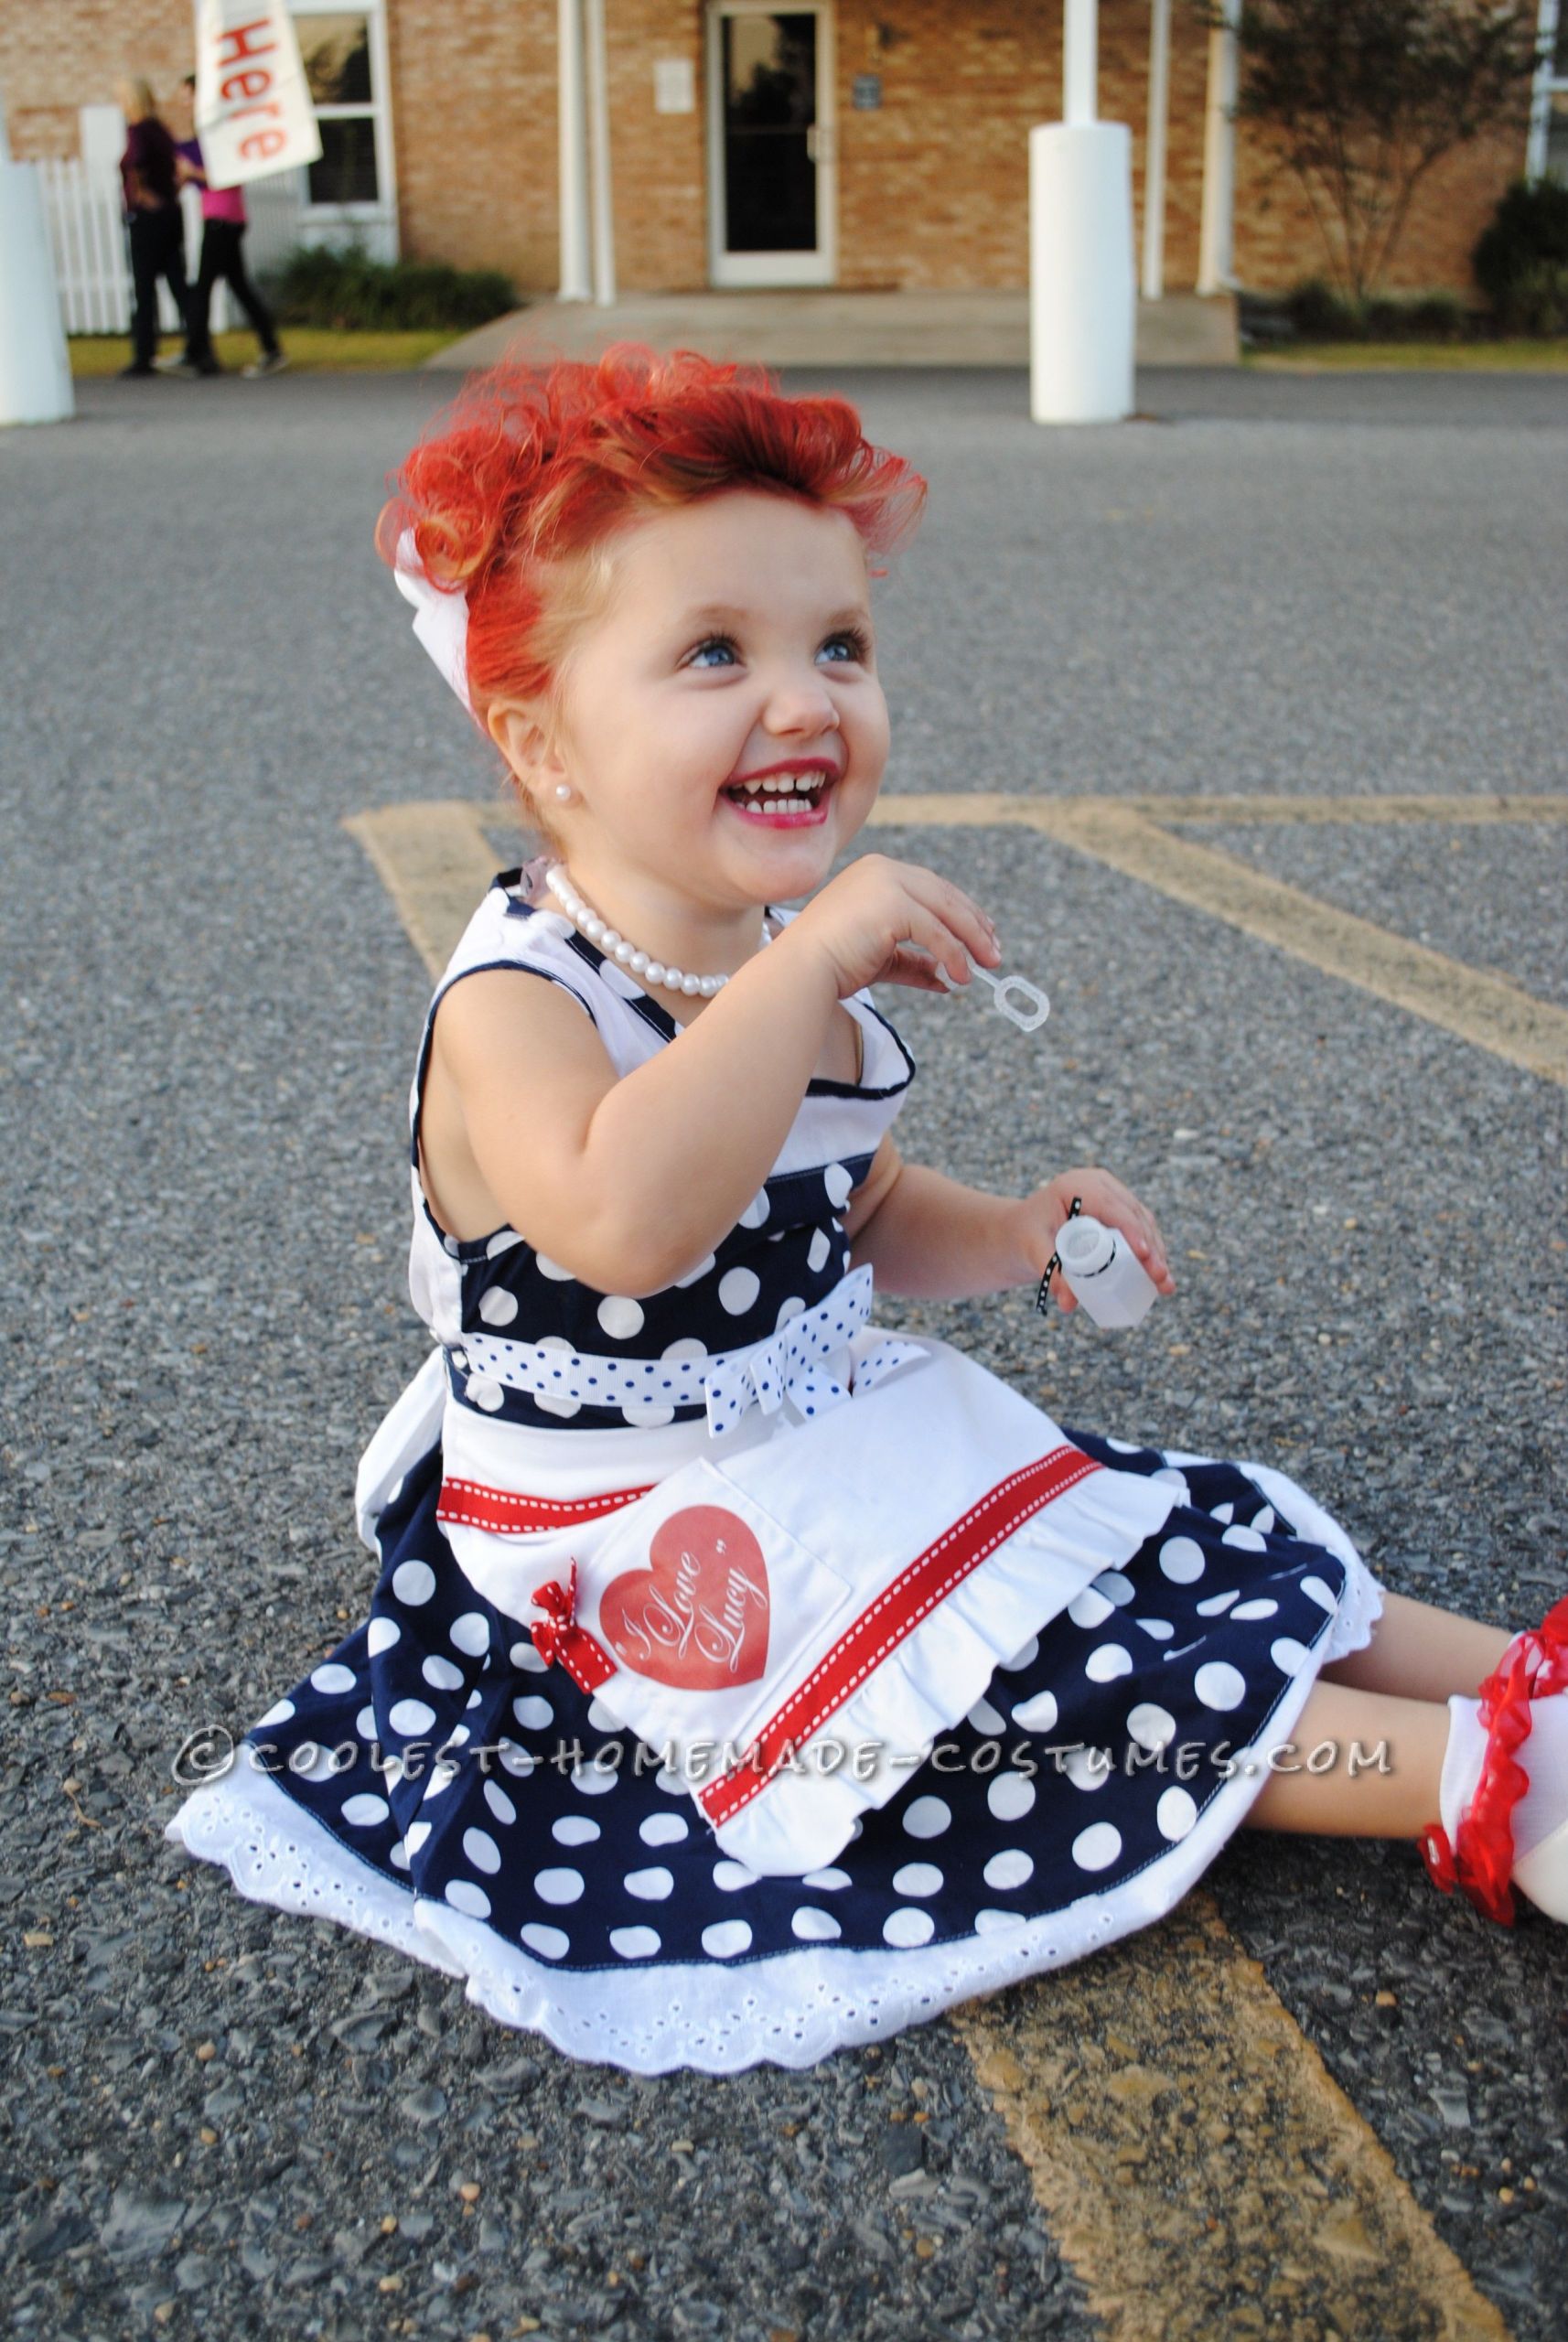 Diy Baby Girl Costumes
 Adorable “I Love Lucy” Homemade Costume for a Toddler